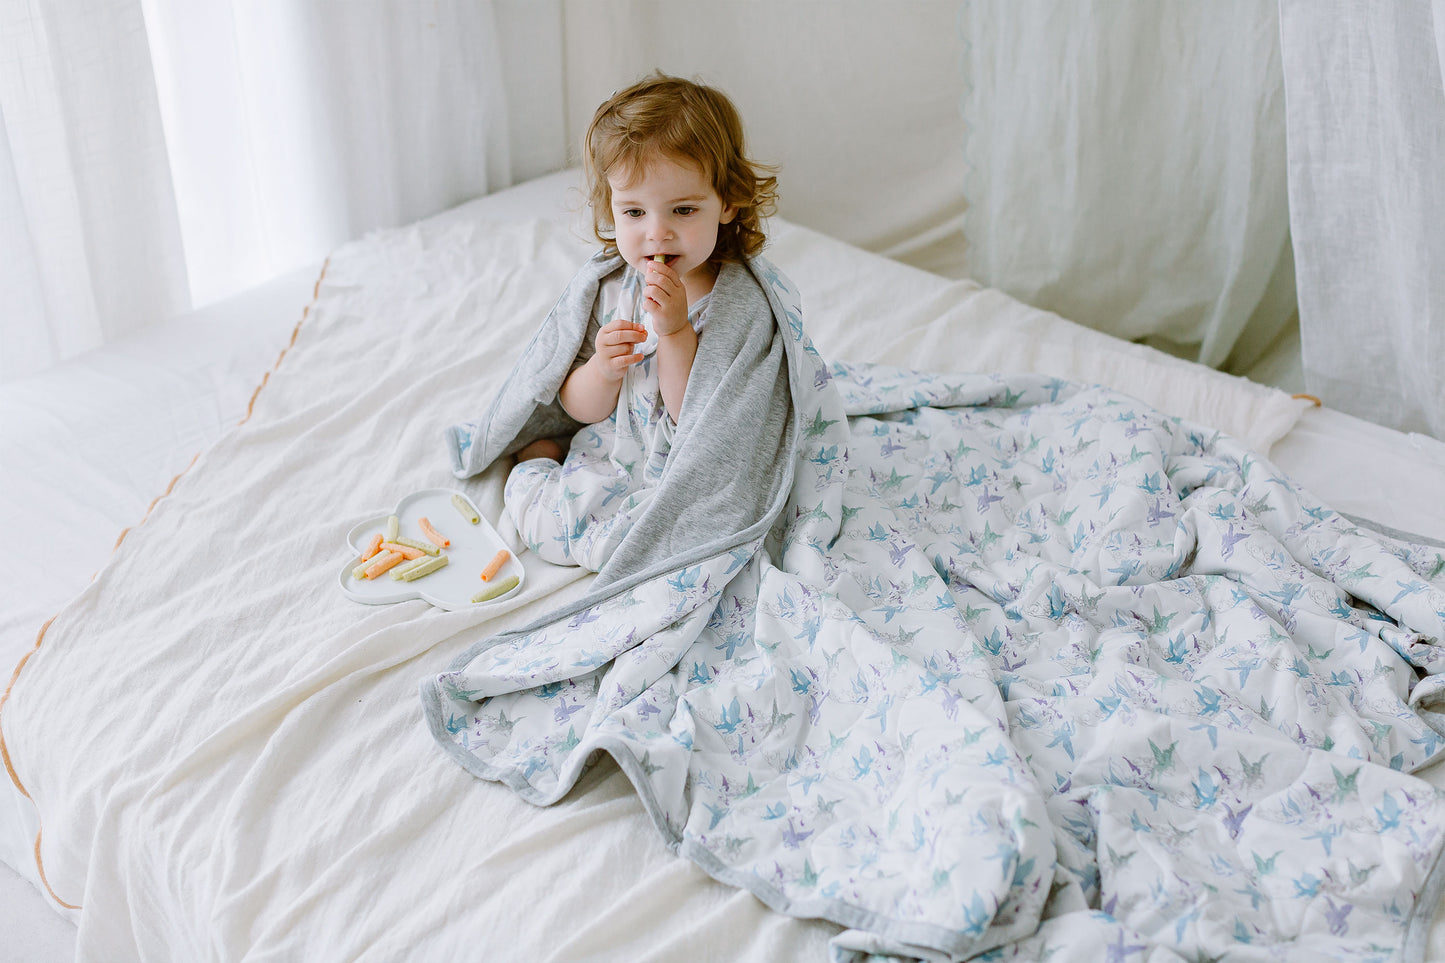 Medium Cozy Quilted Blanket (Bamboo Jersey) - Cloud Ponies